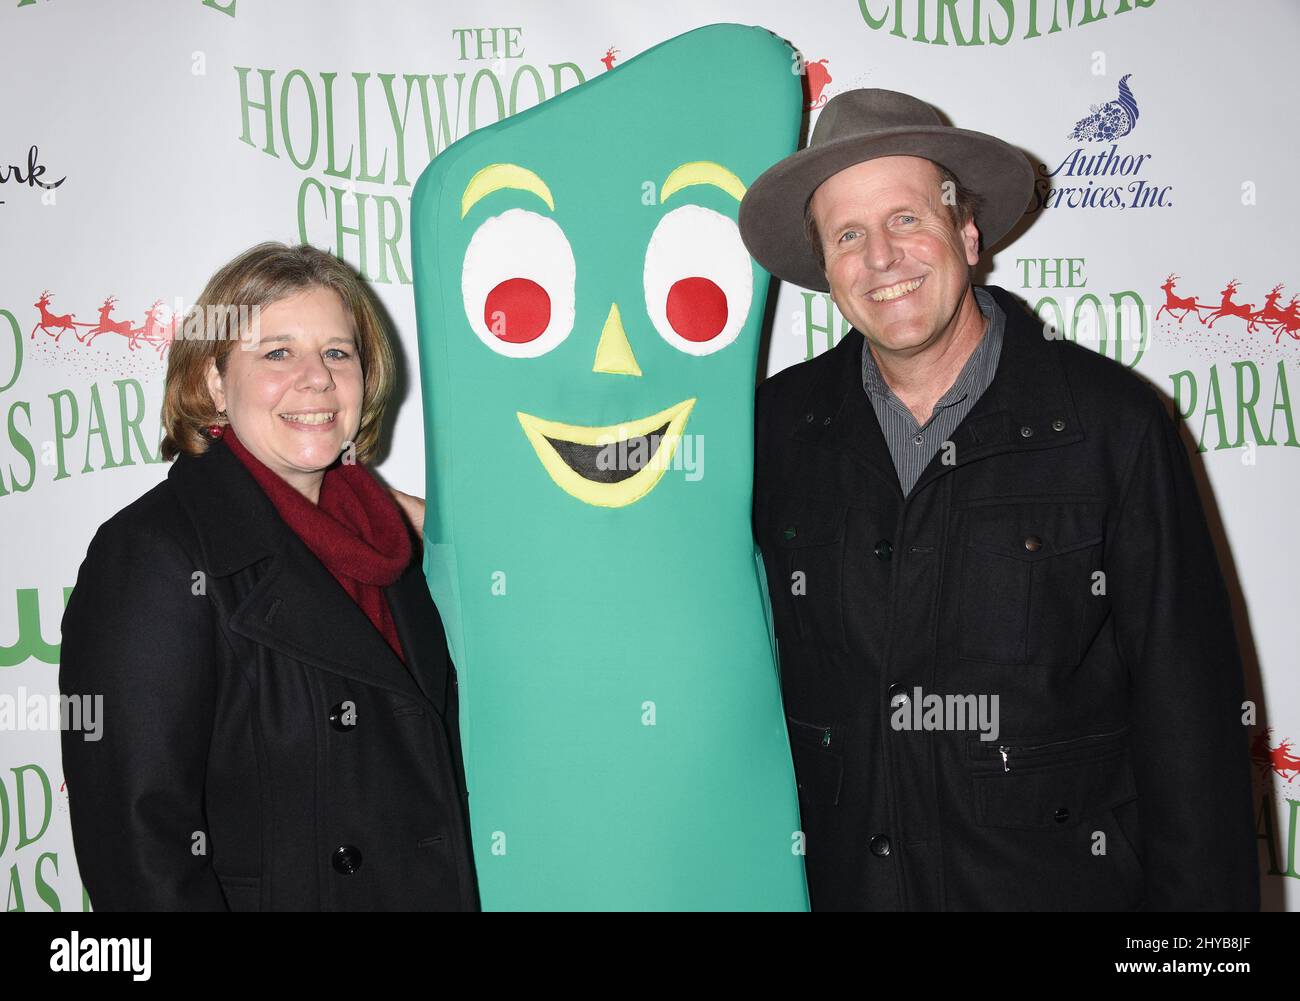 Joe Clokey and Gumby attends the 85th Annual Hollywood Christmas Parade held on Hollywood Blvd. Stock Photo